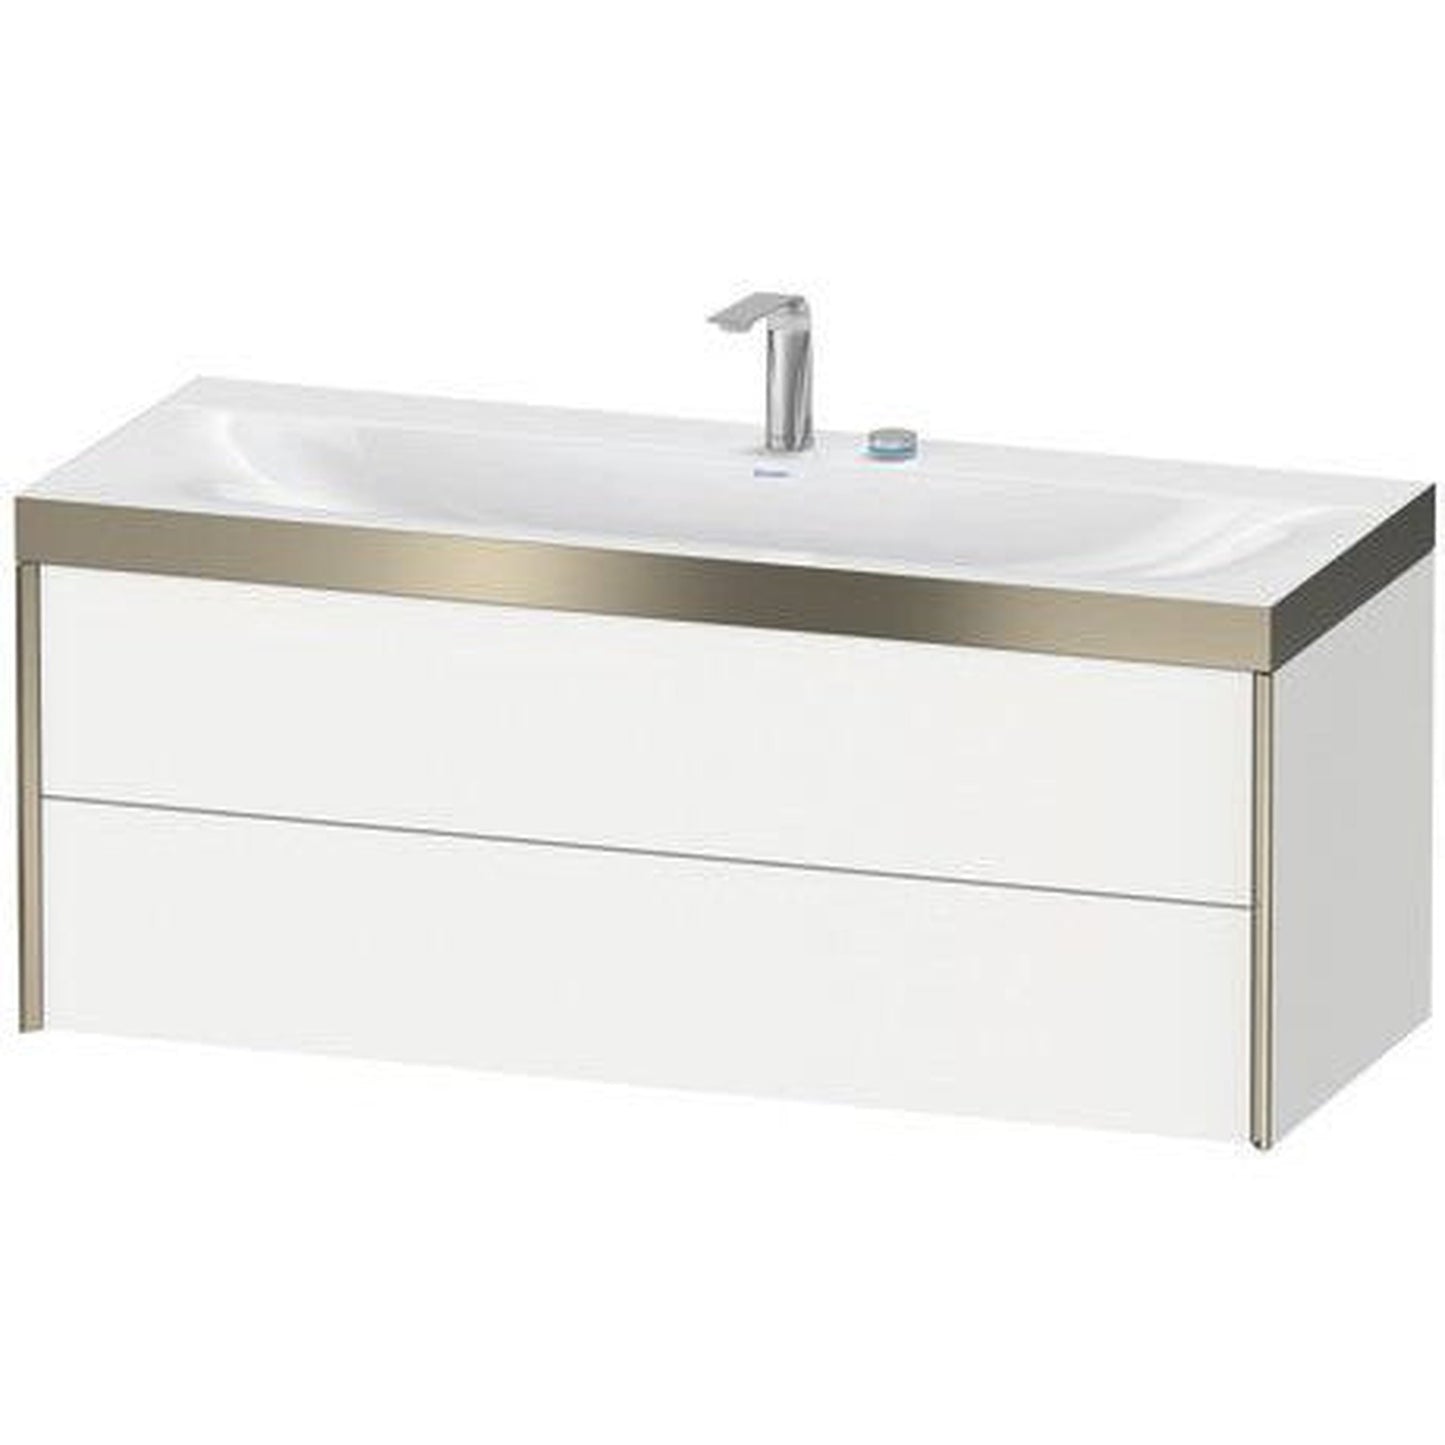 Duravit Xviu 47" x 20" x 19" Two Drawer C-Bonded Wall-Mount Vanity Kit Without Tap Hole, White (XV4617NB185P)